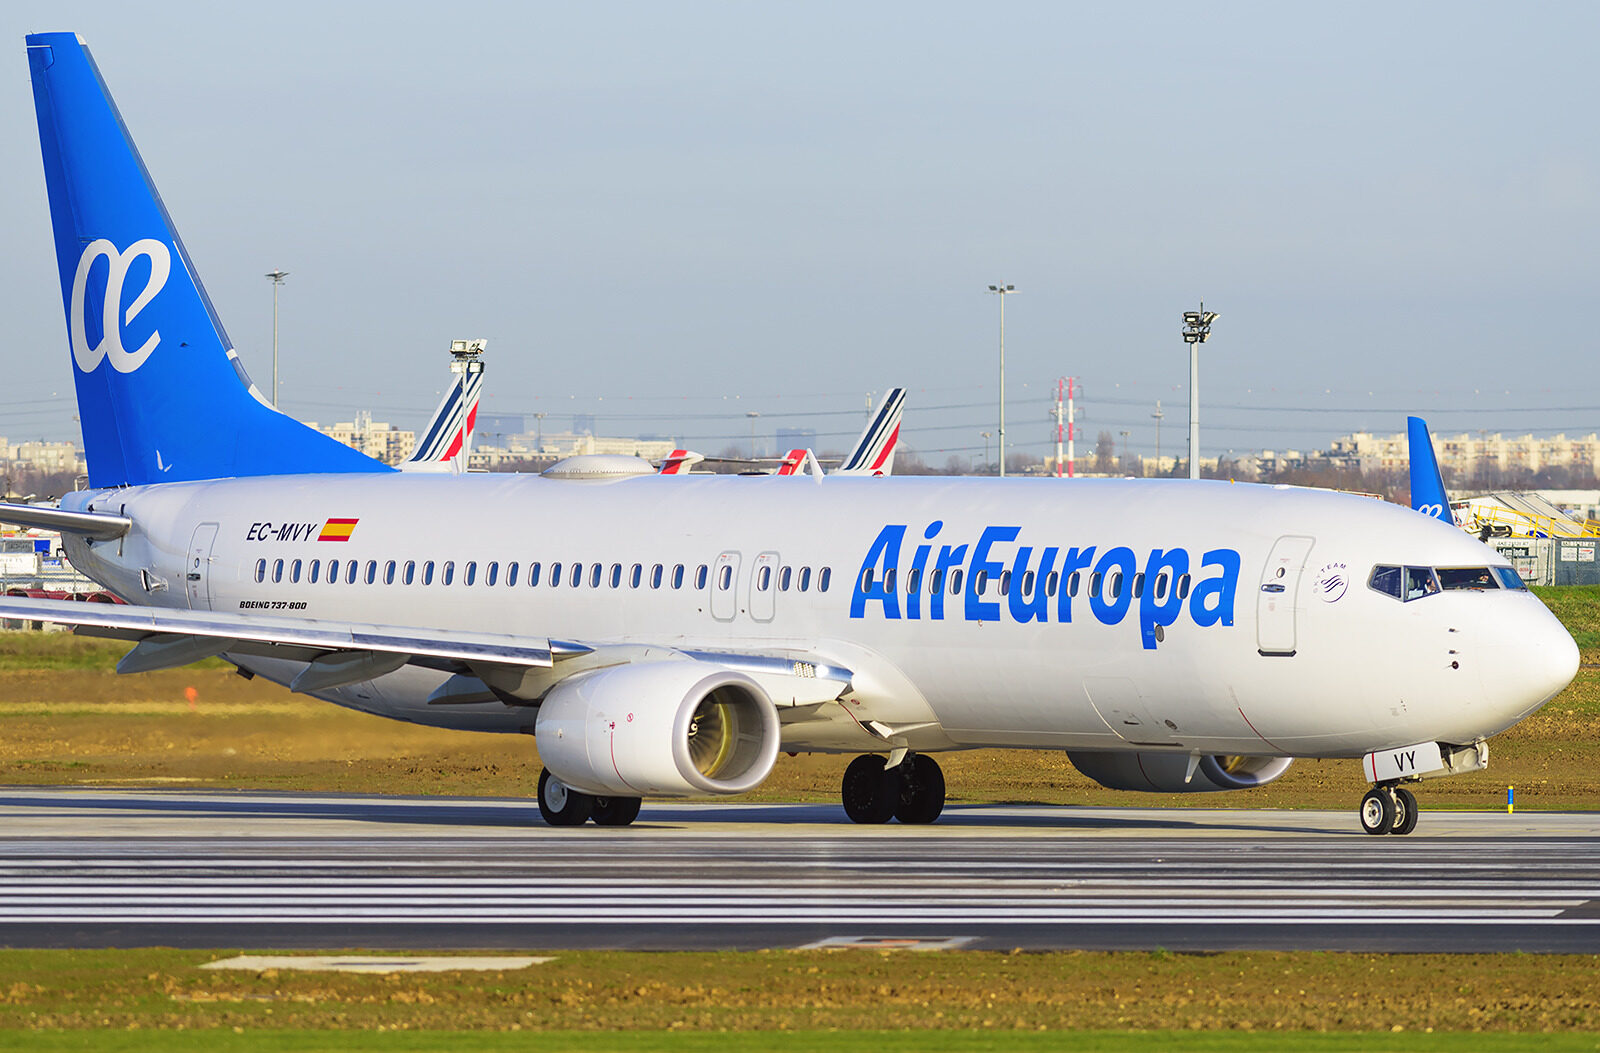 Runway detachment incident: damage to Air Europa plane at AILA